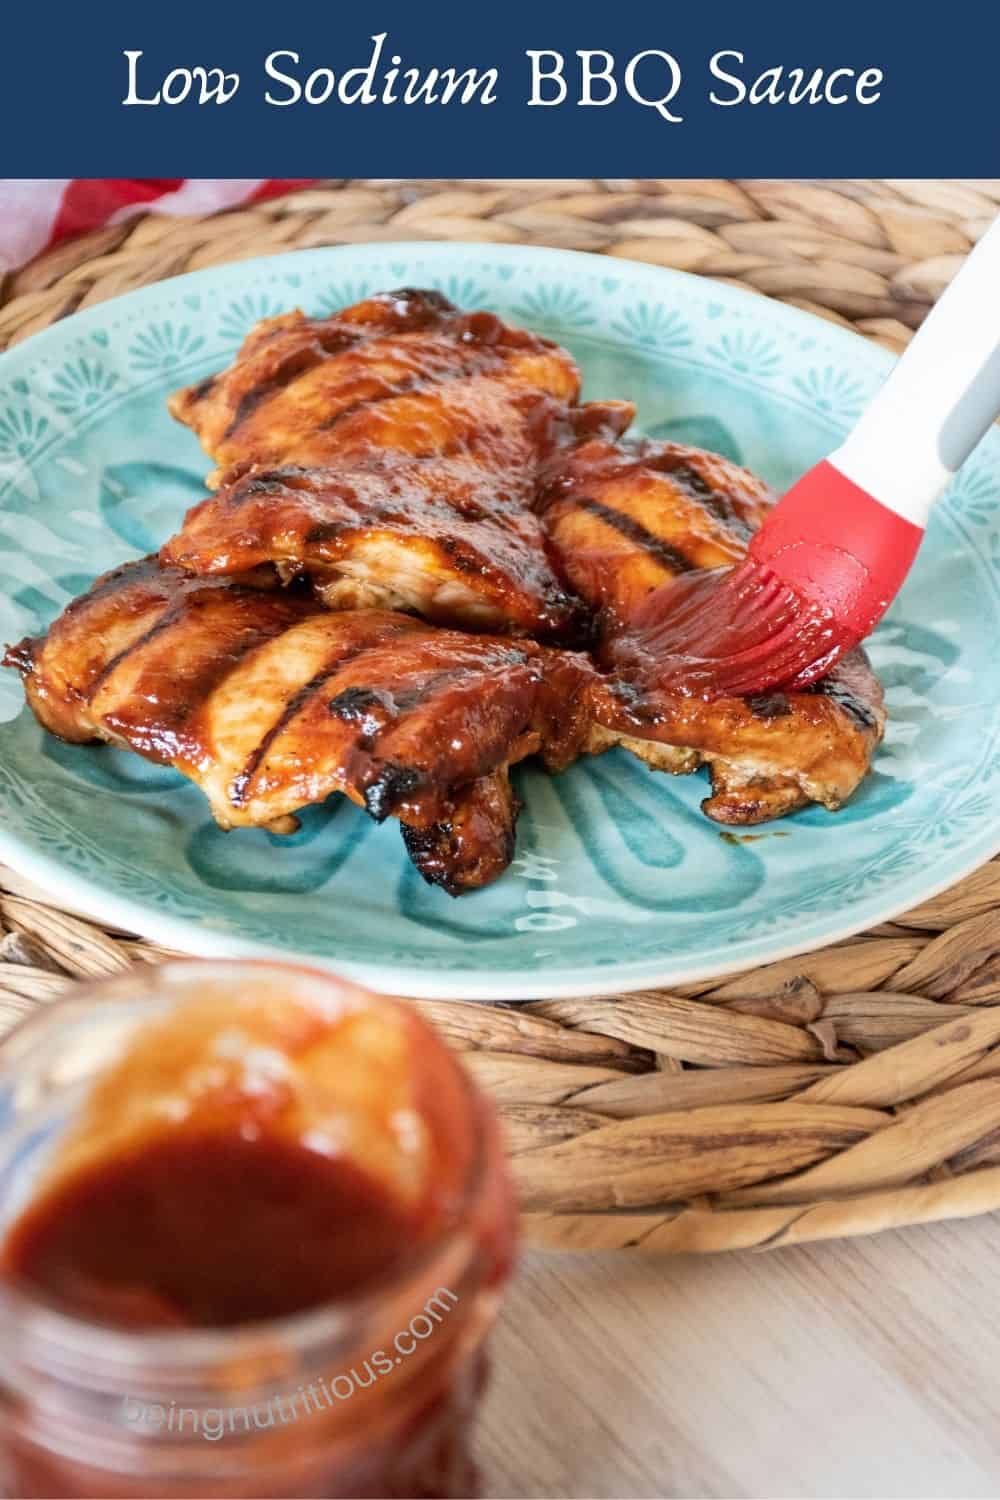 Plate of grilled chicken with BBQ sauce being brushed on. Text overlay: Low Sodium BBQ Sauce